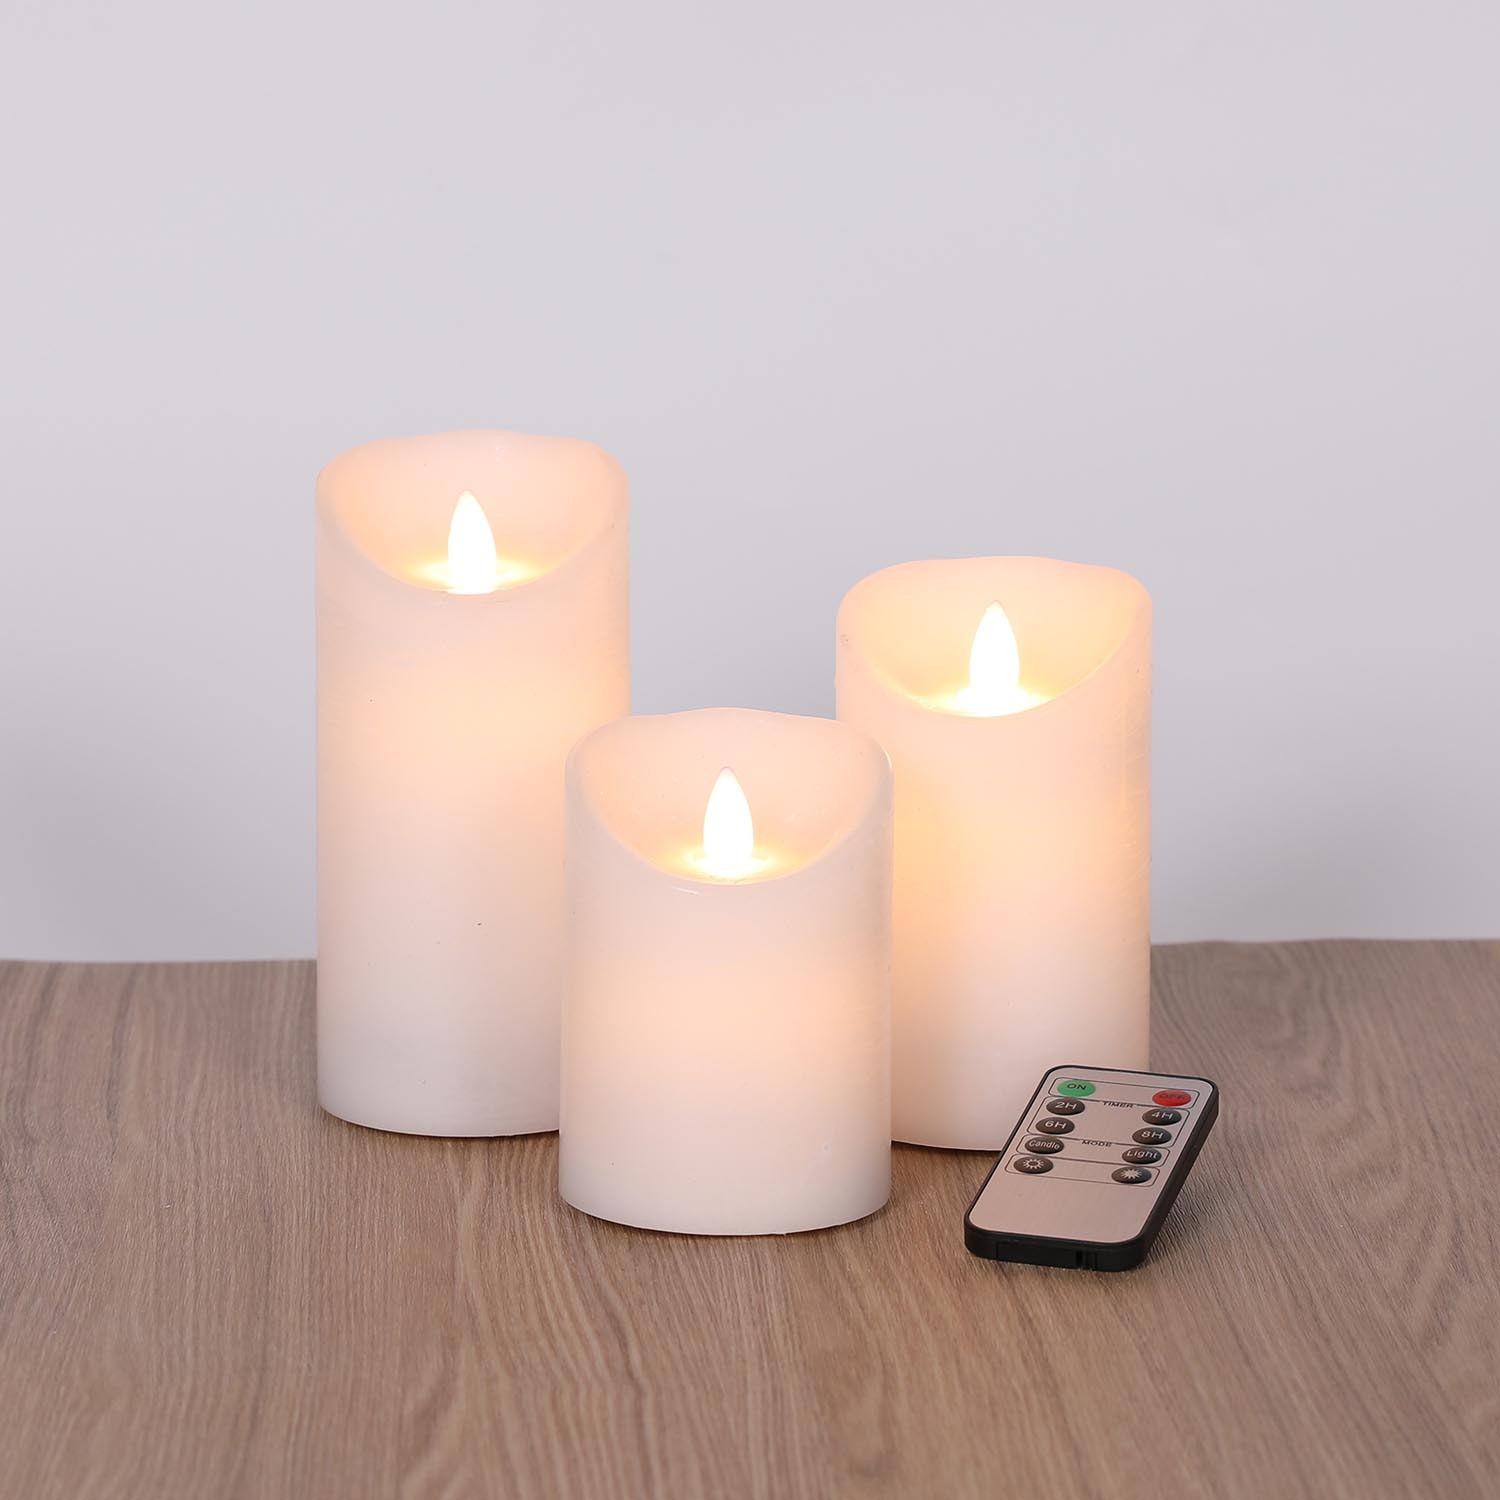 Cotton Fragranced LED Flameless Candles 3 Pack Image 2